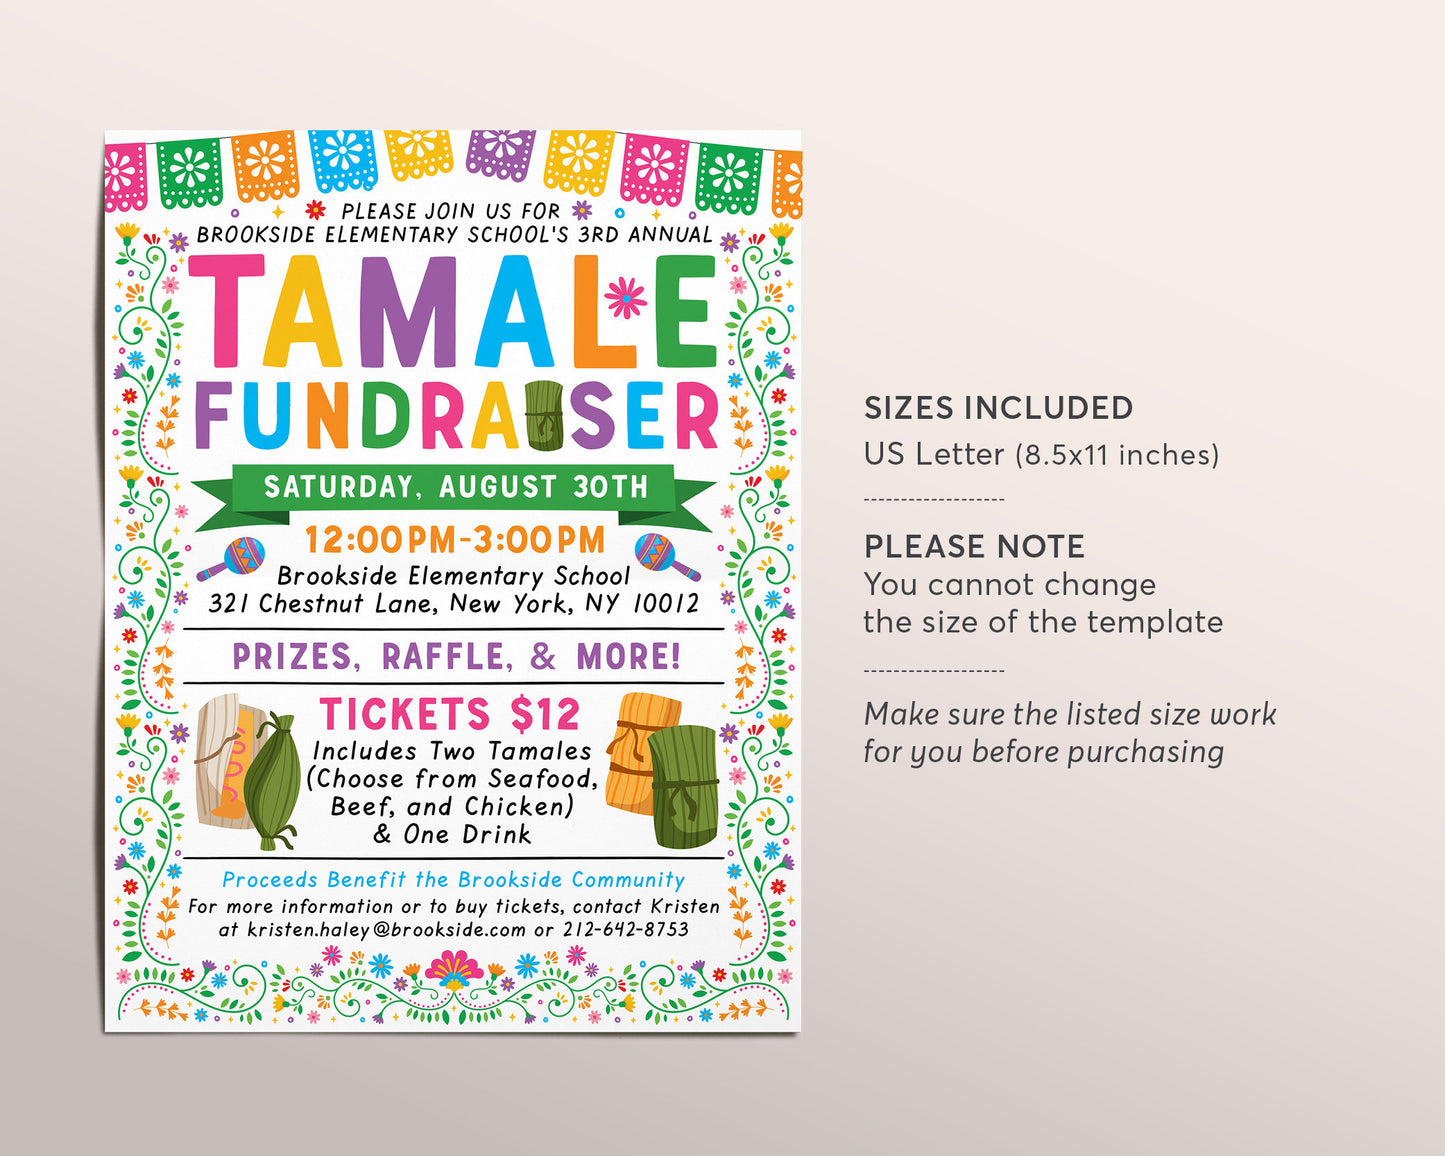 Tamale Fundraiser Flyer Editable Template, Fiesta Mexican Night Dinner Charity, Church Community PTO PTA School Benefit Event Youth Sports